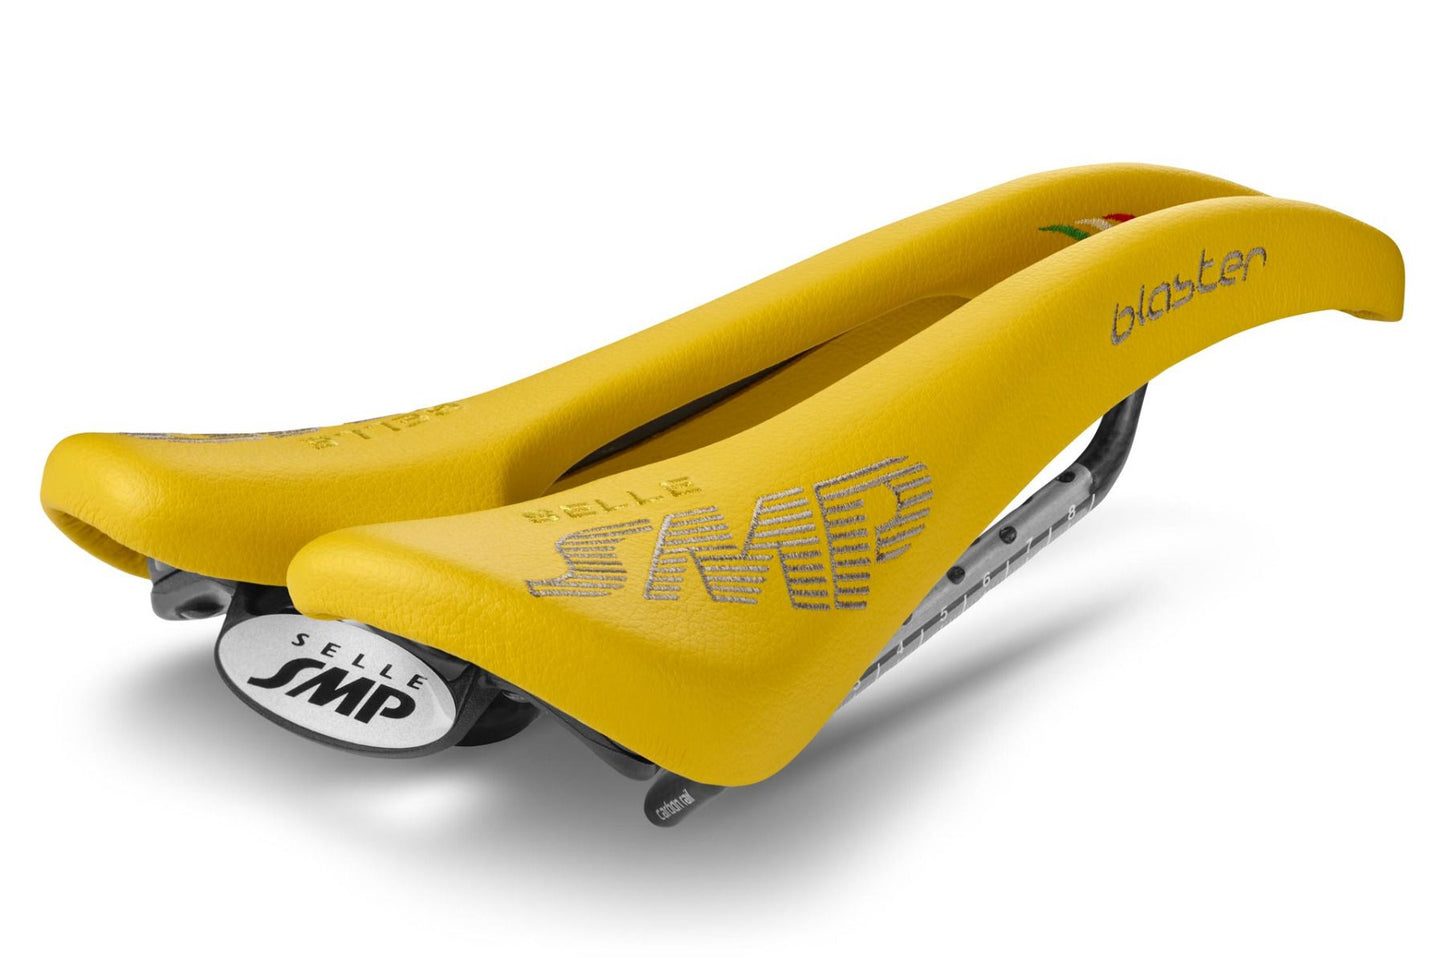 Selle SMP Blaster Saddle with Carbon Rails (Yellow)